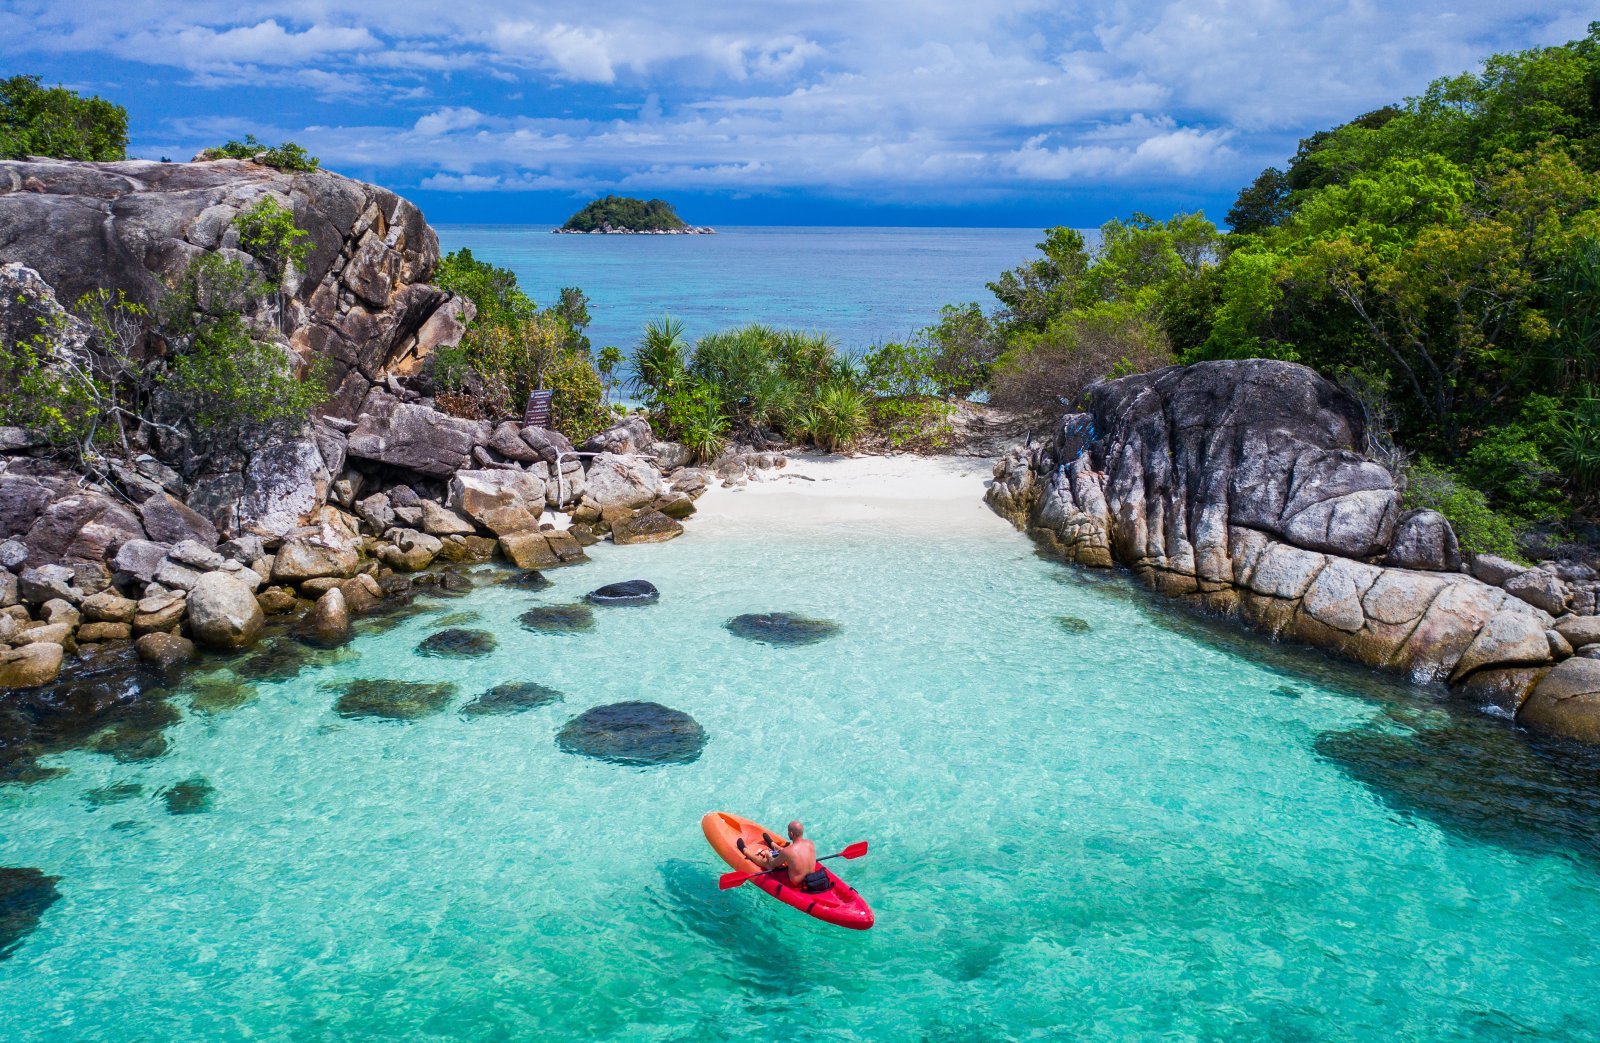 <p class="wp-caption-text">Image Credit: Shutterstock / NAS CREATIVES</p>  <p><span>Koh Lipe, located in the southern Andaman Sea, is often celebrated for its breathtaking beauty, earning it the nickname “the Maldives of Thailand.” Despite its popularity, the island has managed to strike a balance between development and the preservation of its natural and marine environments. The vibrant coral reefs surrounding Koh Lipe are part of the Tarutao National Marine Park, offering exceptional opportunities for snorkeling and diving while emphasizing the importance of marine conservation. The island’s Walking Street provides a lively hub of activity, with a variety of dining and shopping options that showcase the local culture and cuisine. Koh Lipe’s commitment to sustainable tourism practices, including efforts to protect its coral reefs and reduce waste, ensures that visitors can responsibly enjoy the island’s natural splendor.</span></p>